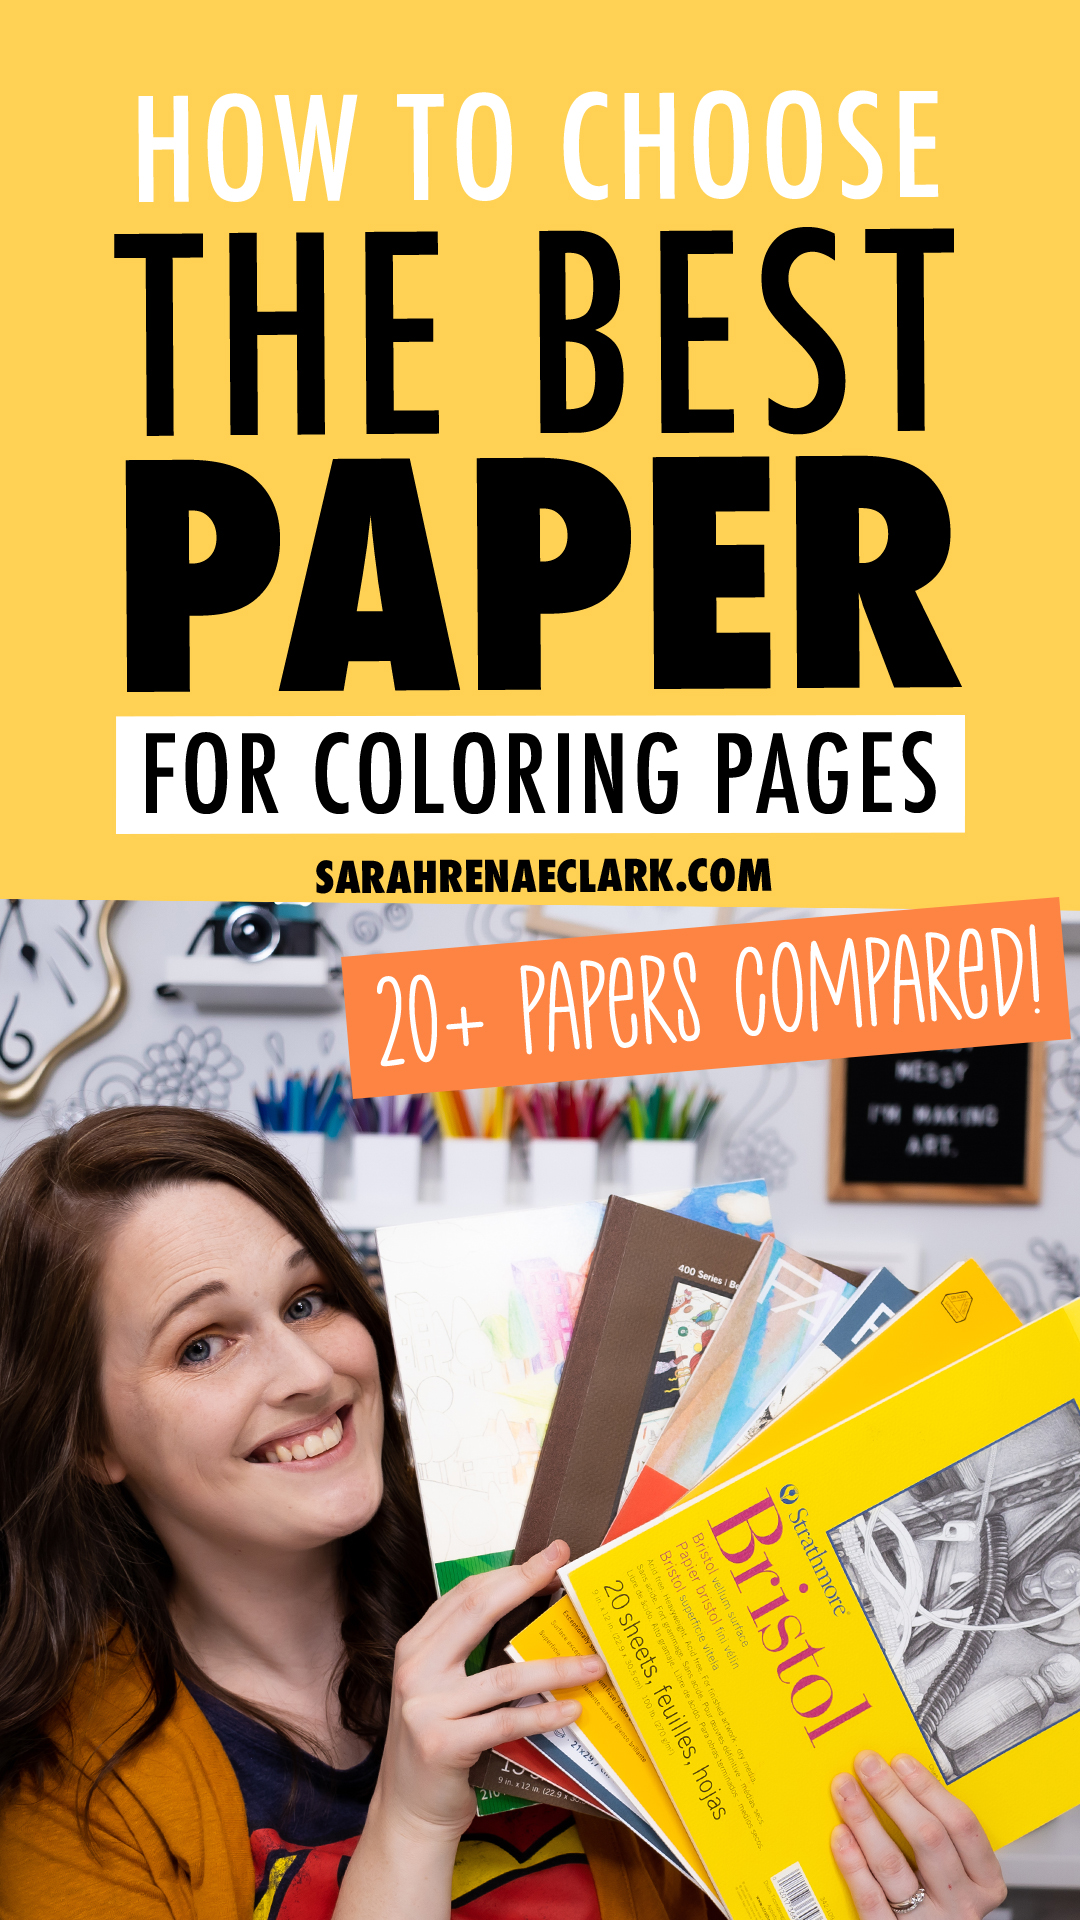 how-to-choose-the-best-paper-3-sarah-renae-clark-coloring-book-artist-and-designer